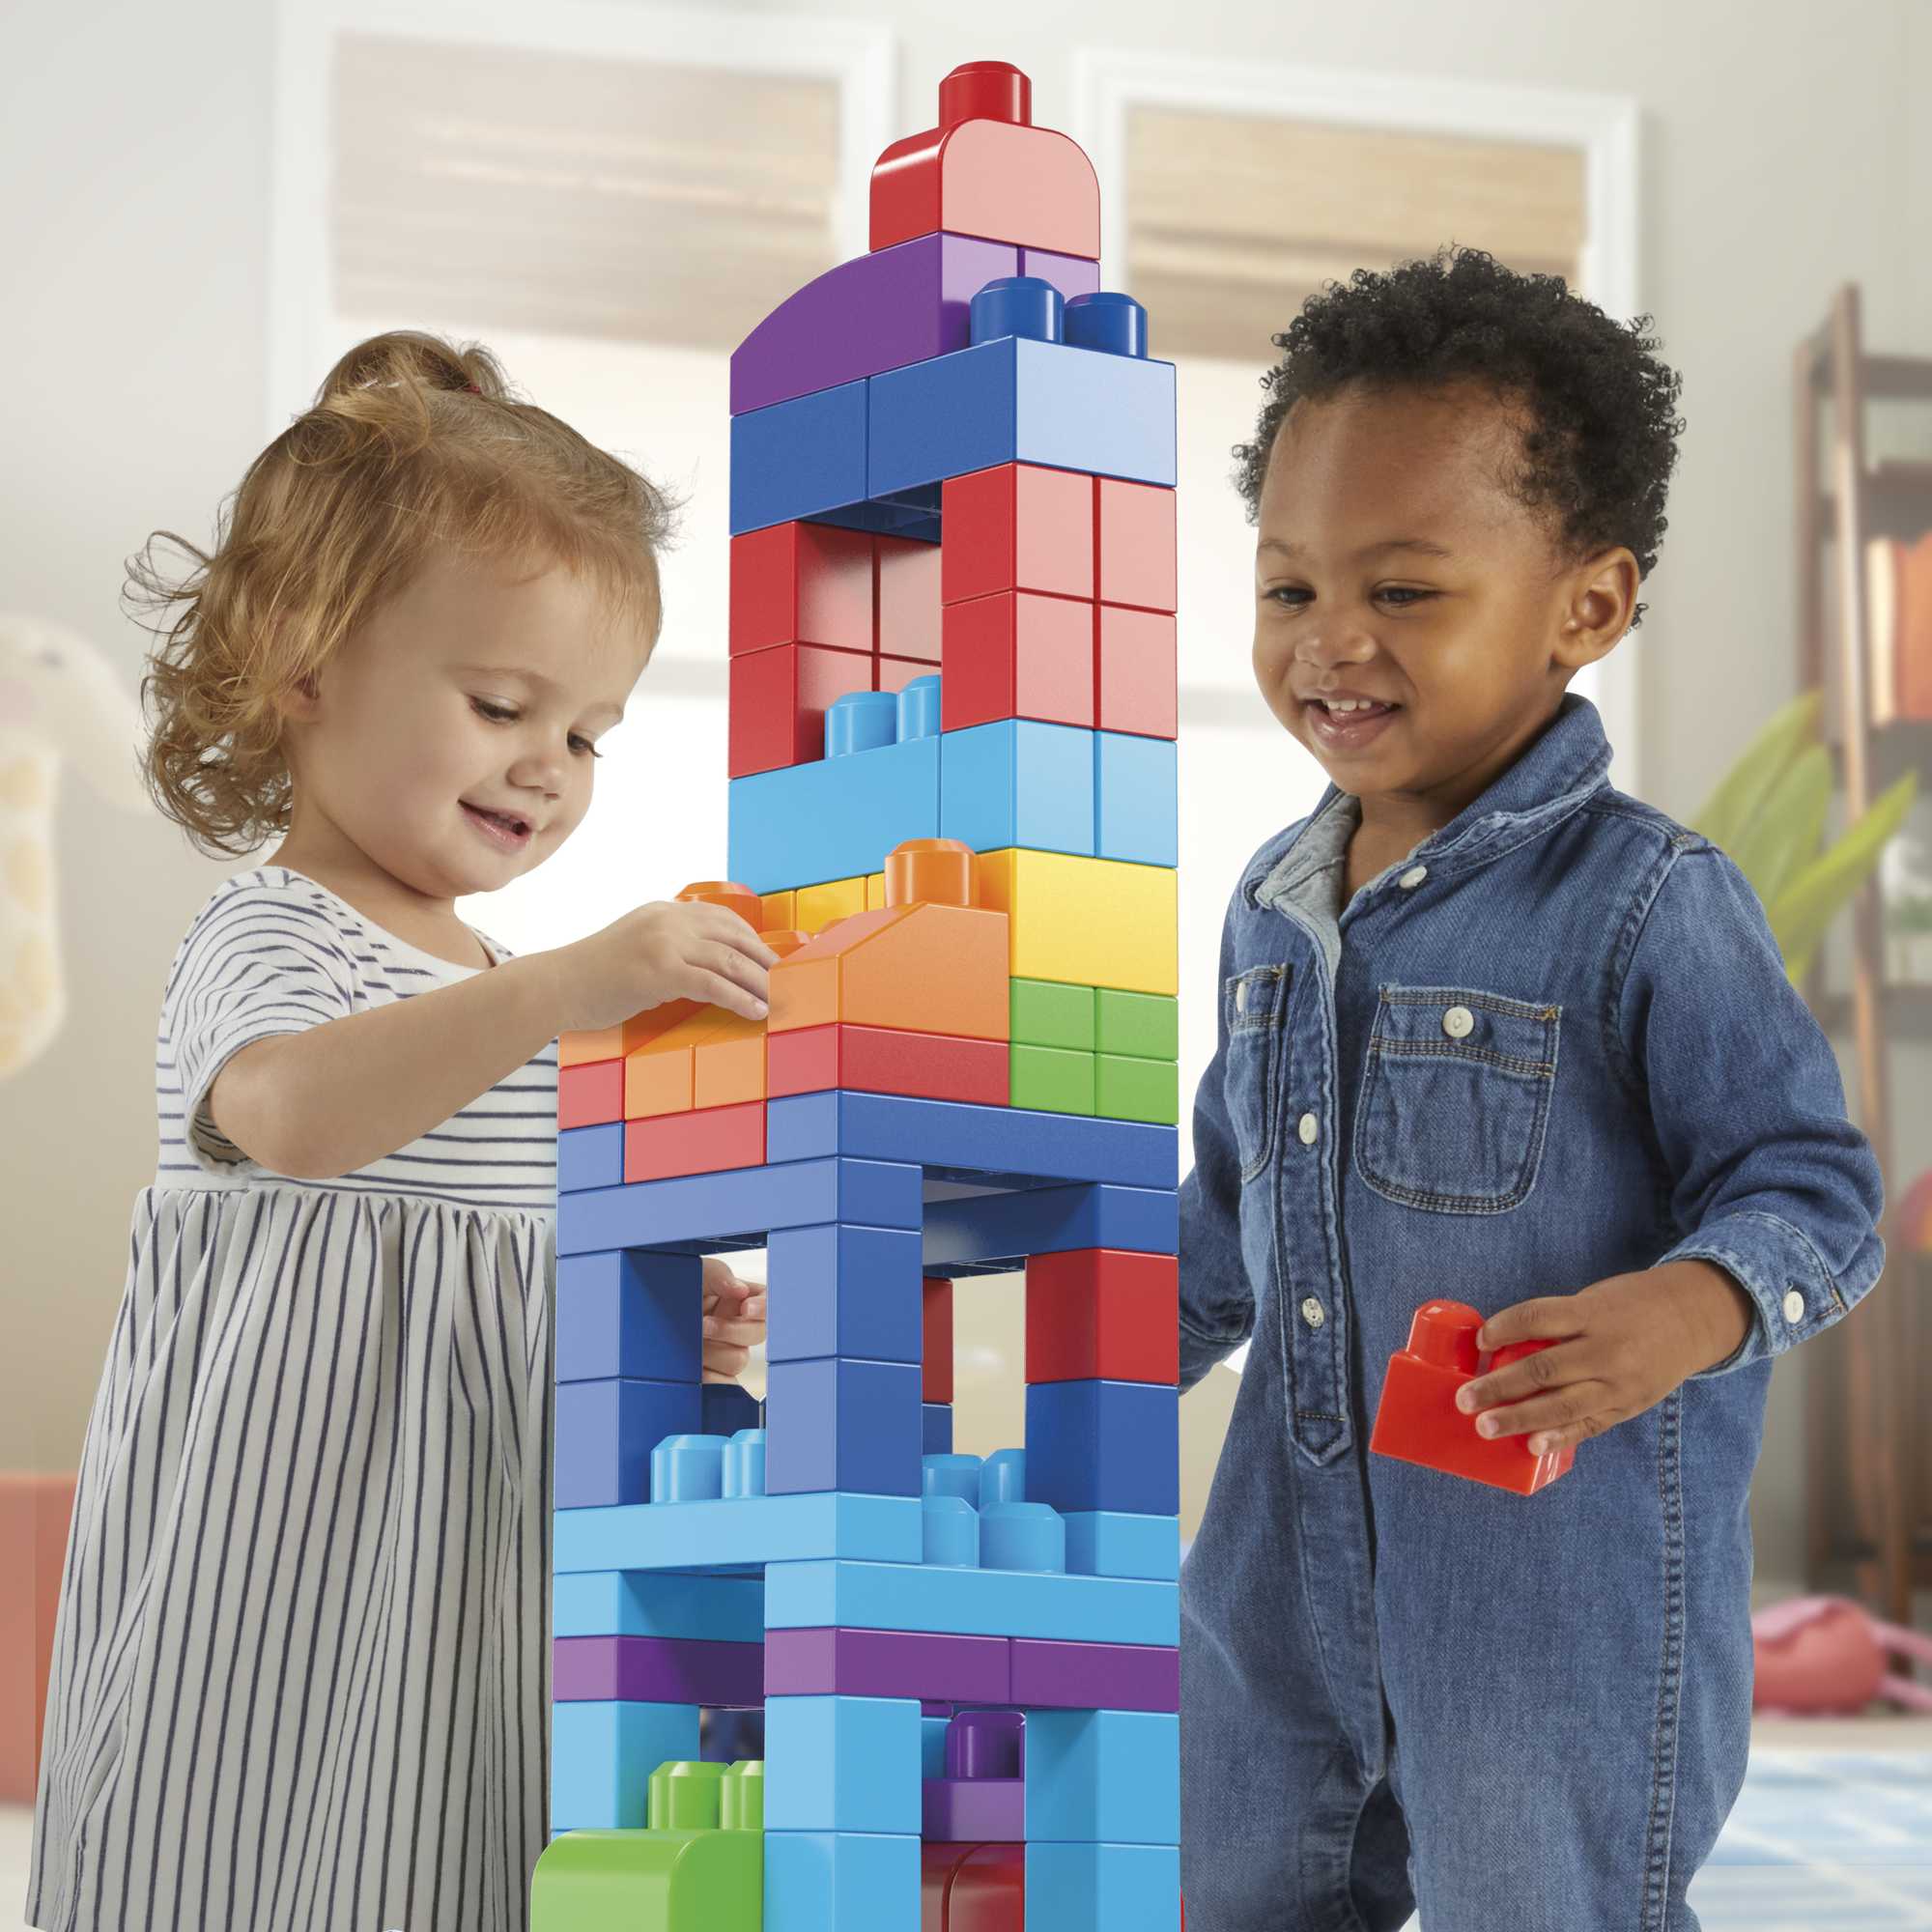 MEGA BLOKS Fisher-Price Big Building Bag, Building Blocks for Toddlers With Storage (80 Pieces), Blue, Ages 1-5 Years - image 3 of 7